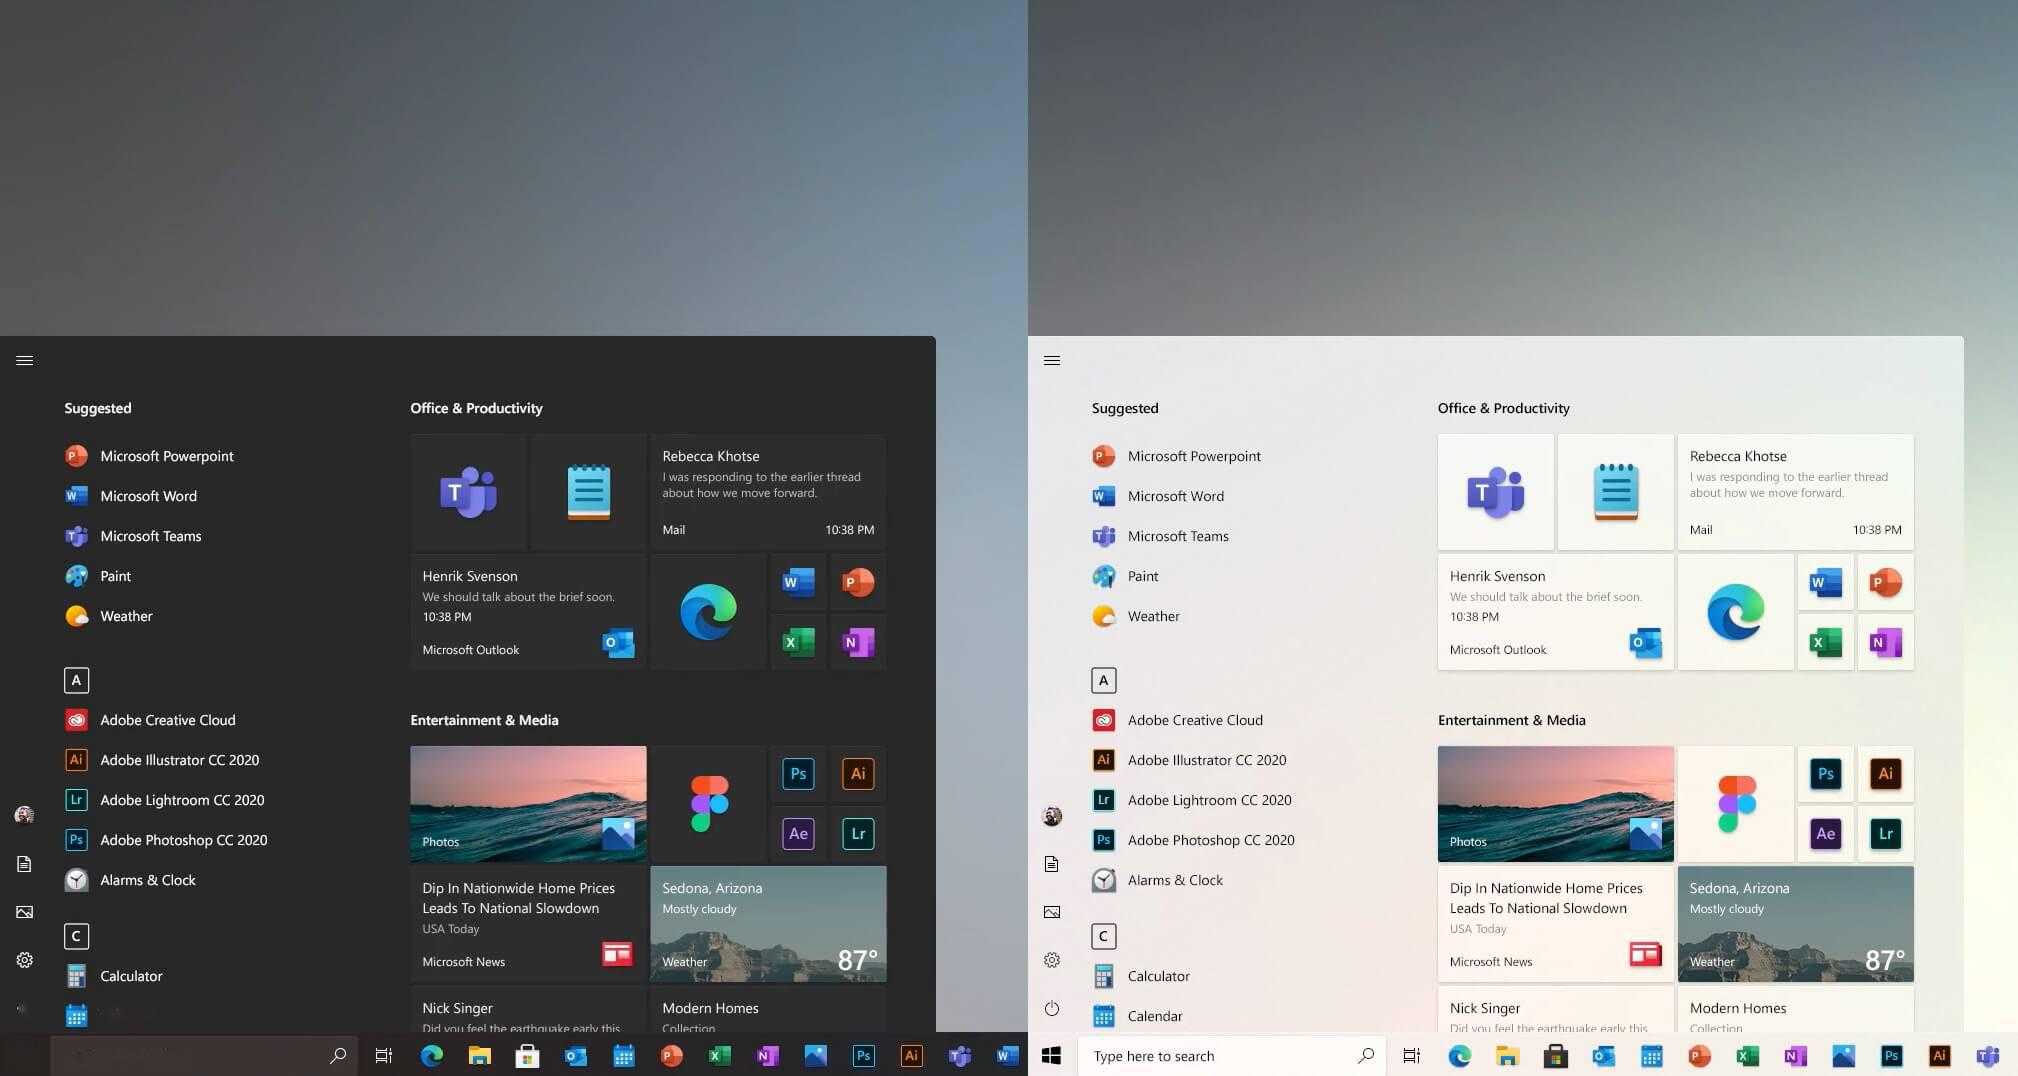 Windows 10 20h2 new features and changes